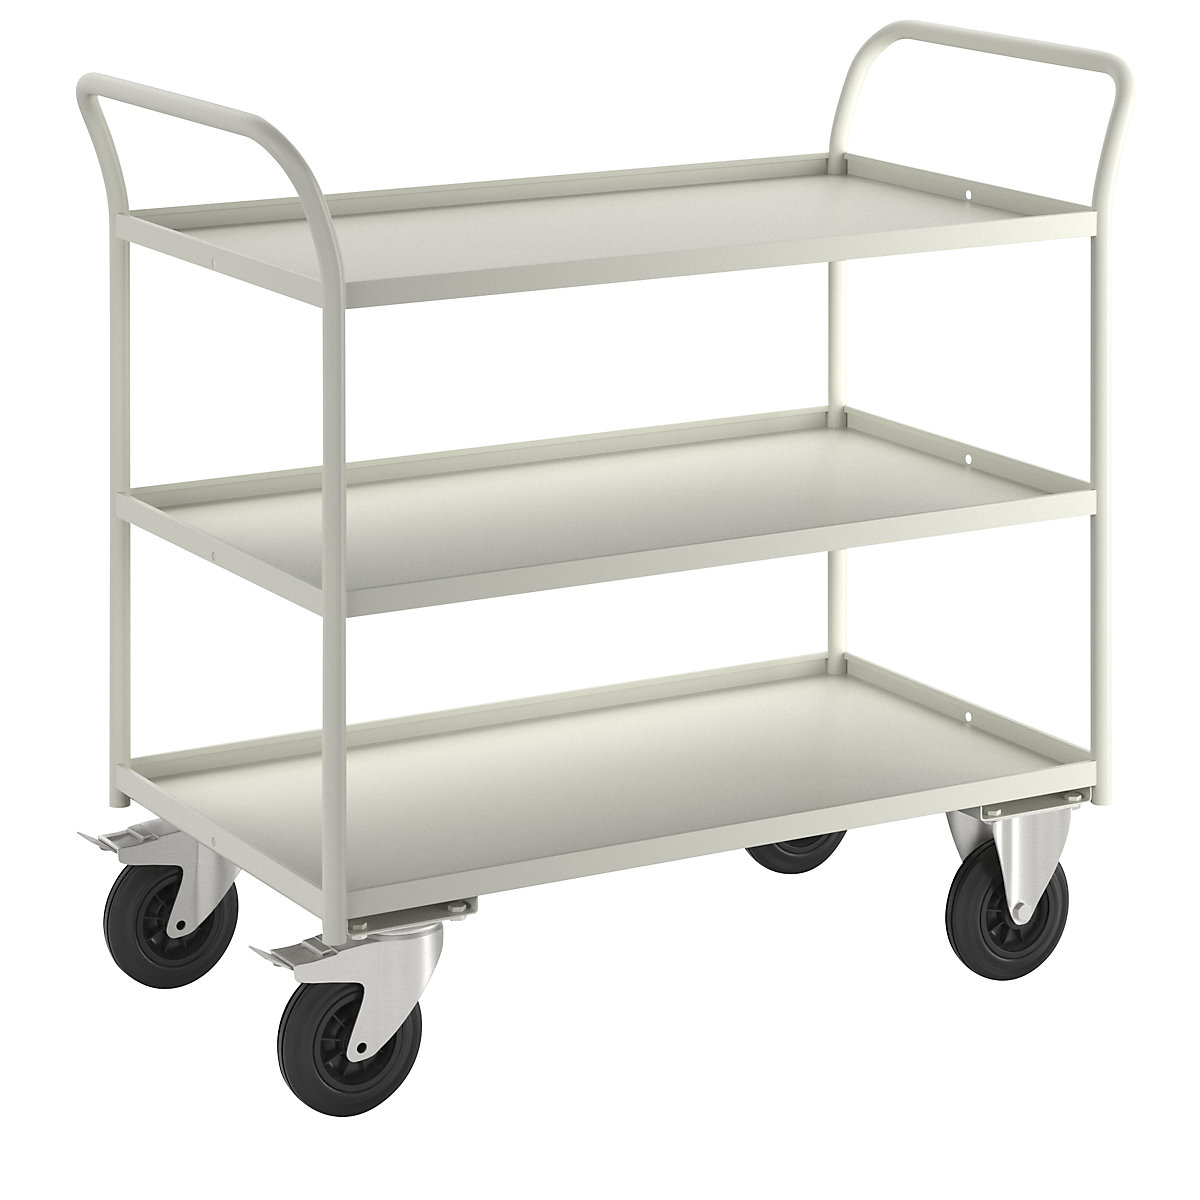 KM41 table trolley – Kongamek, 3 shelves with raised edges, LxWxH 1070 x 550 x 1000 mm, white, 2 swivel castors with stops, 2 fixed castors-7